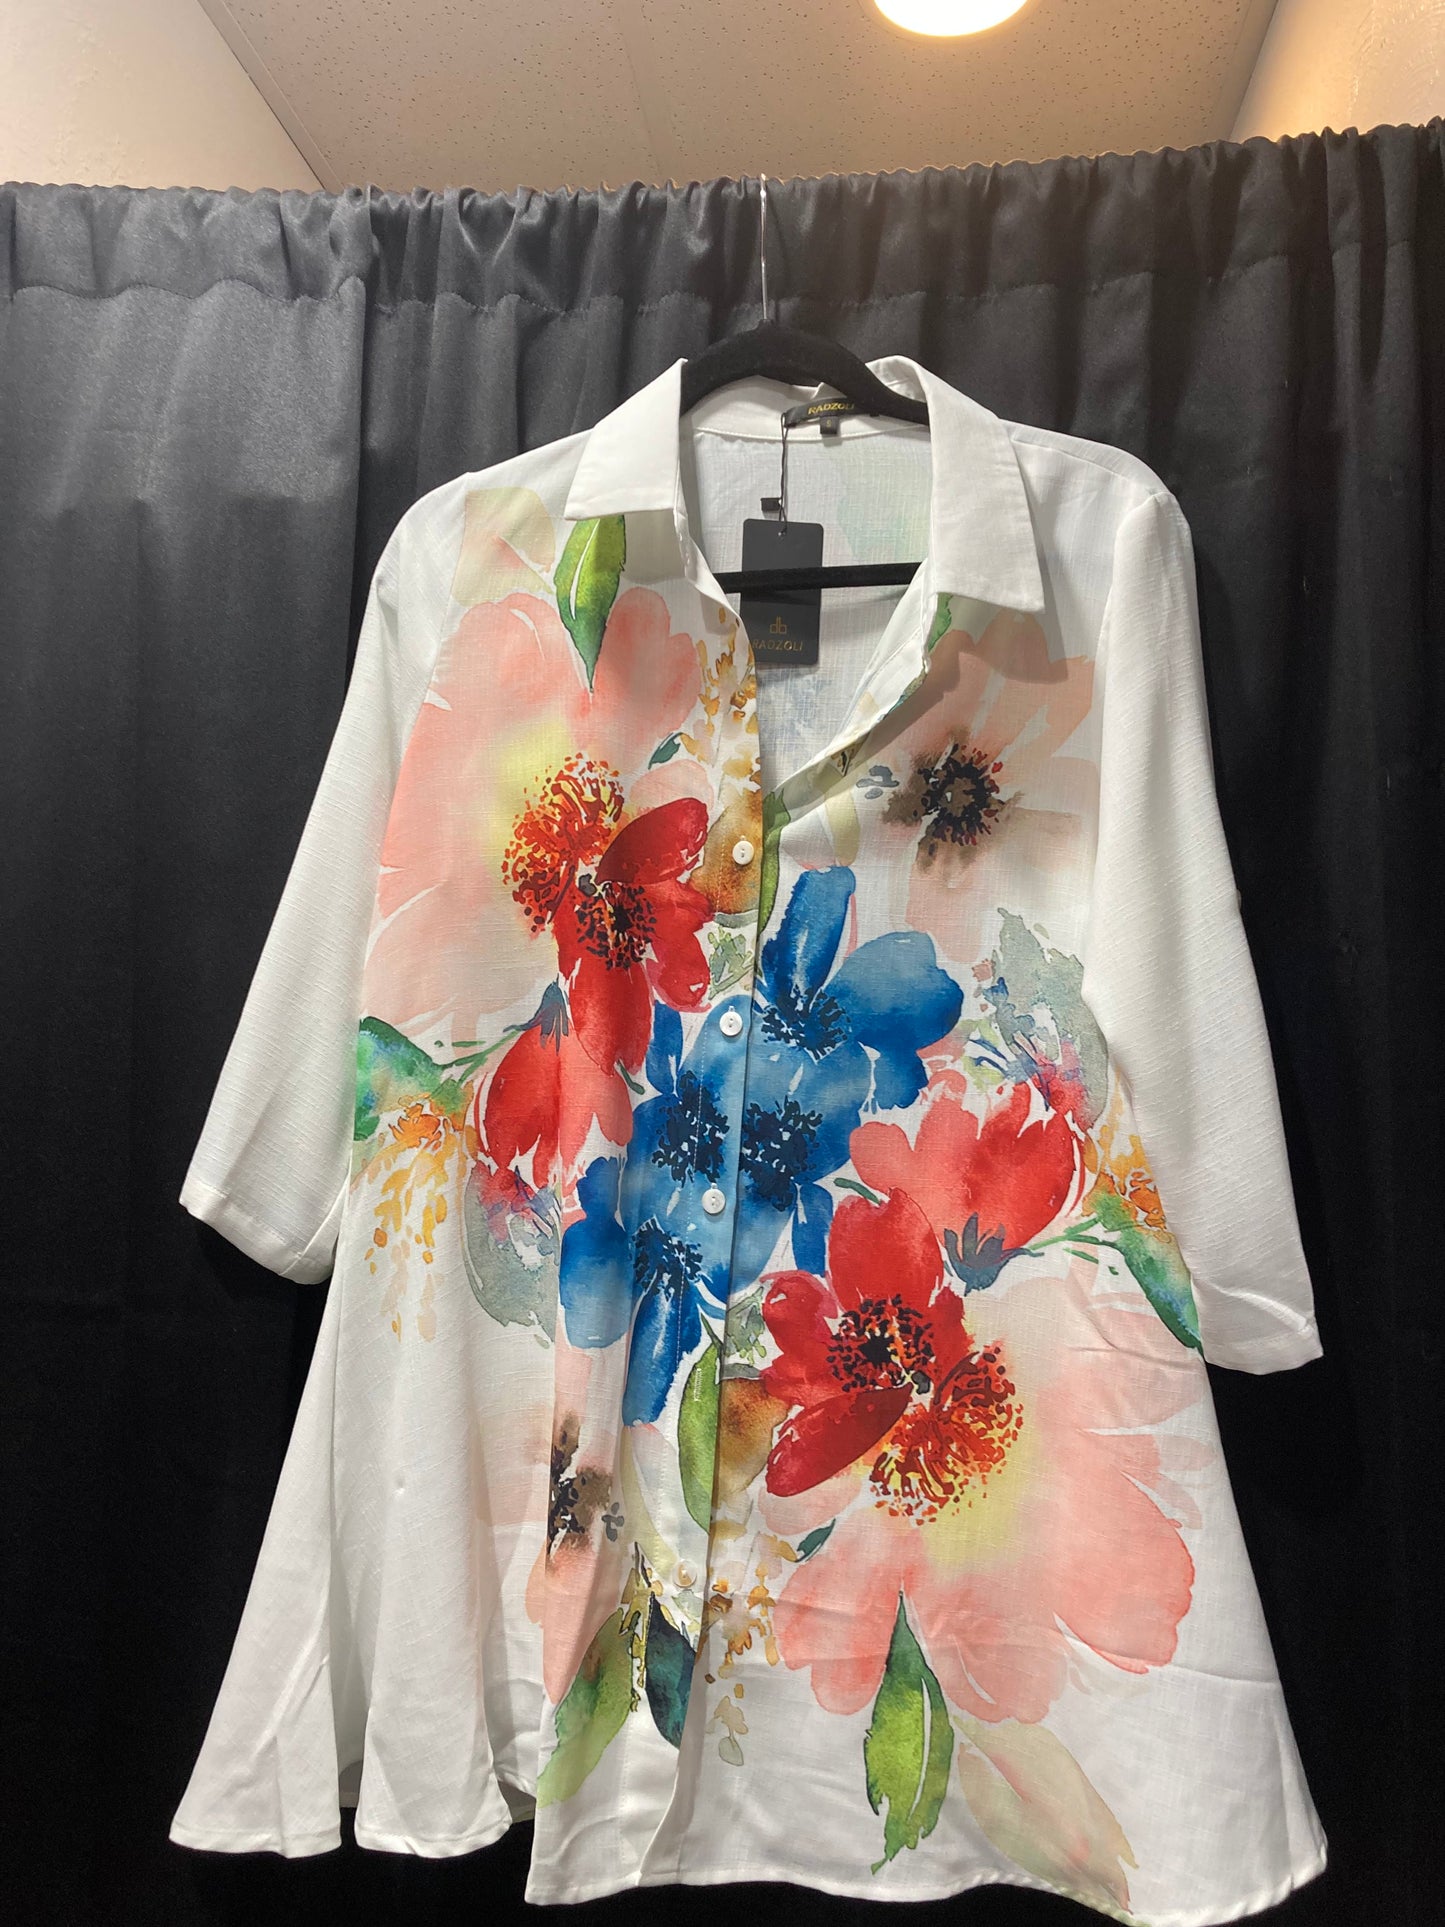 White Shirt With Watercolor Floral Design